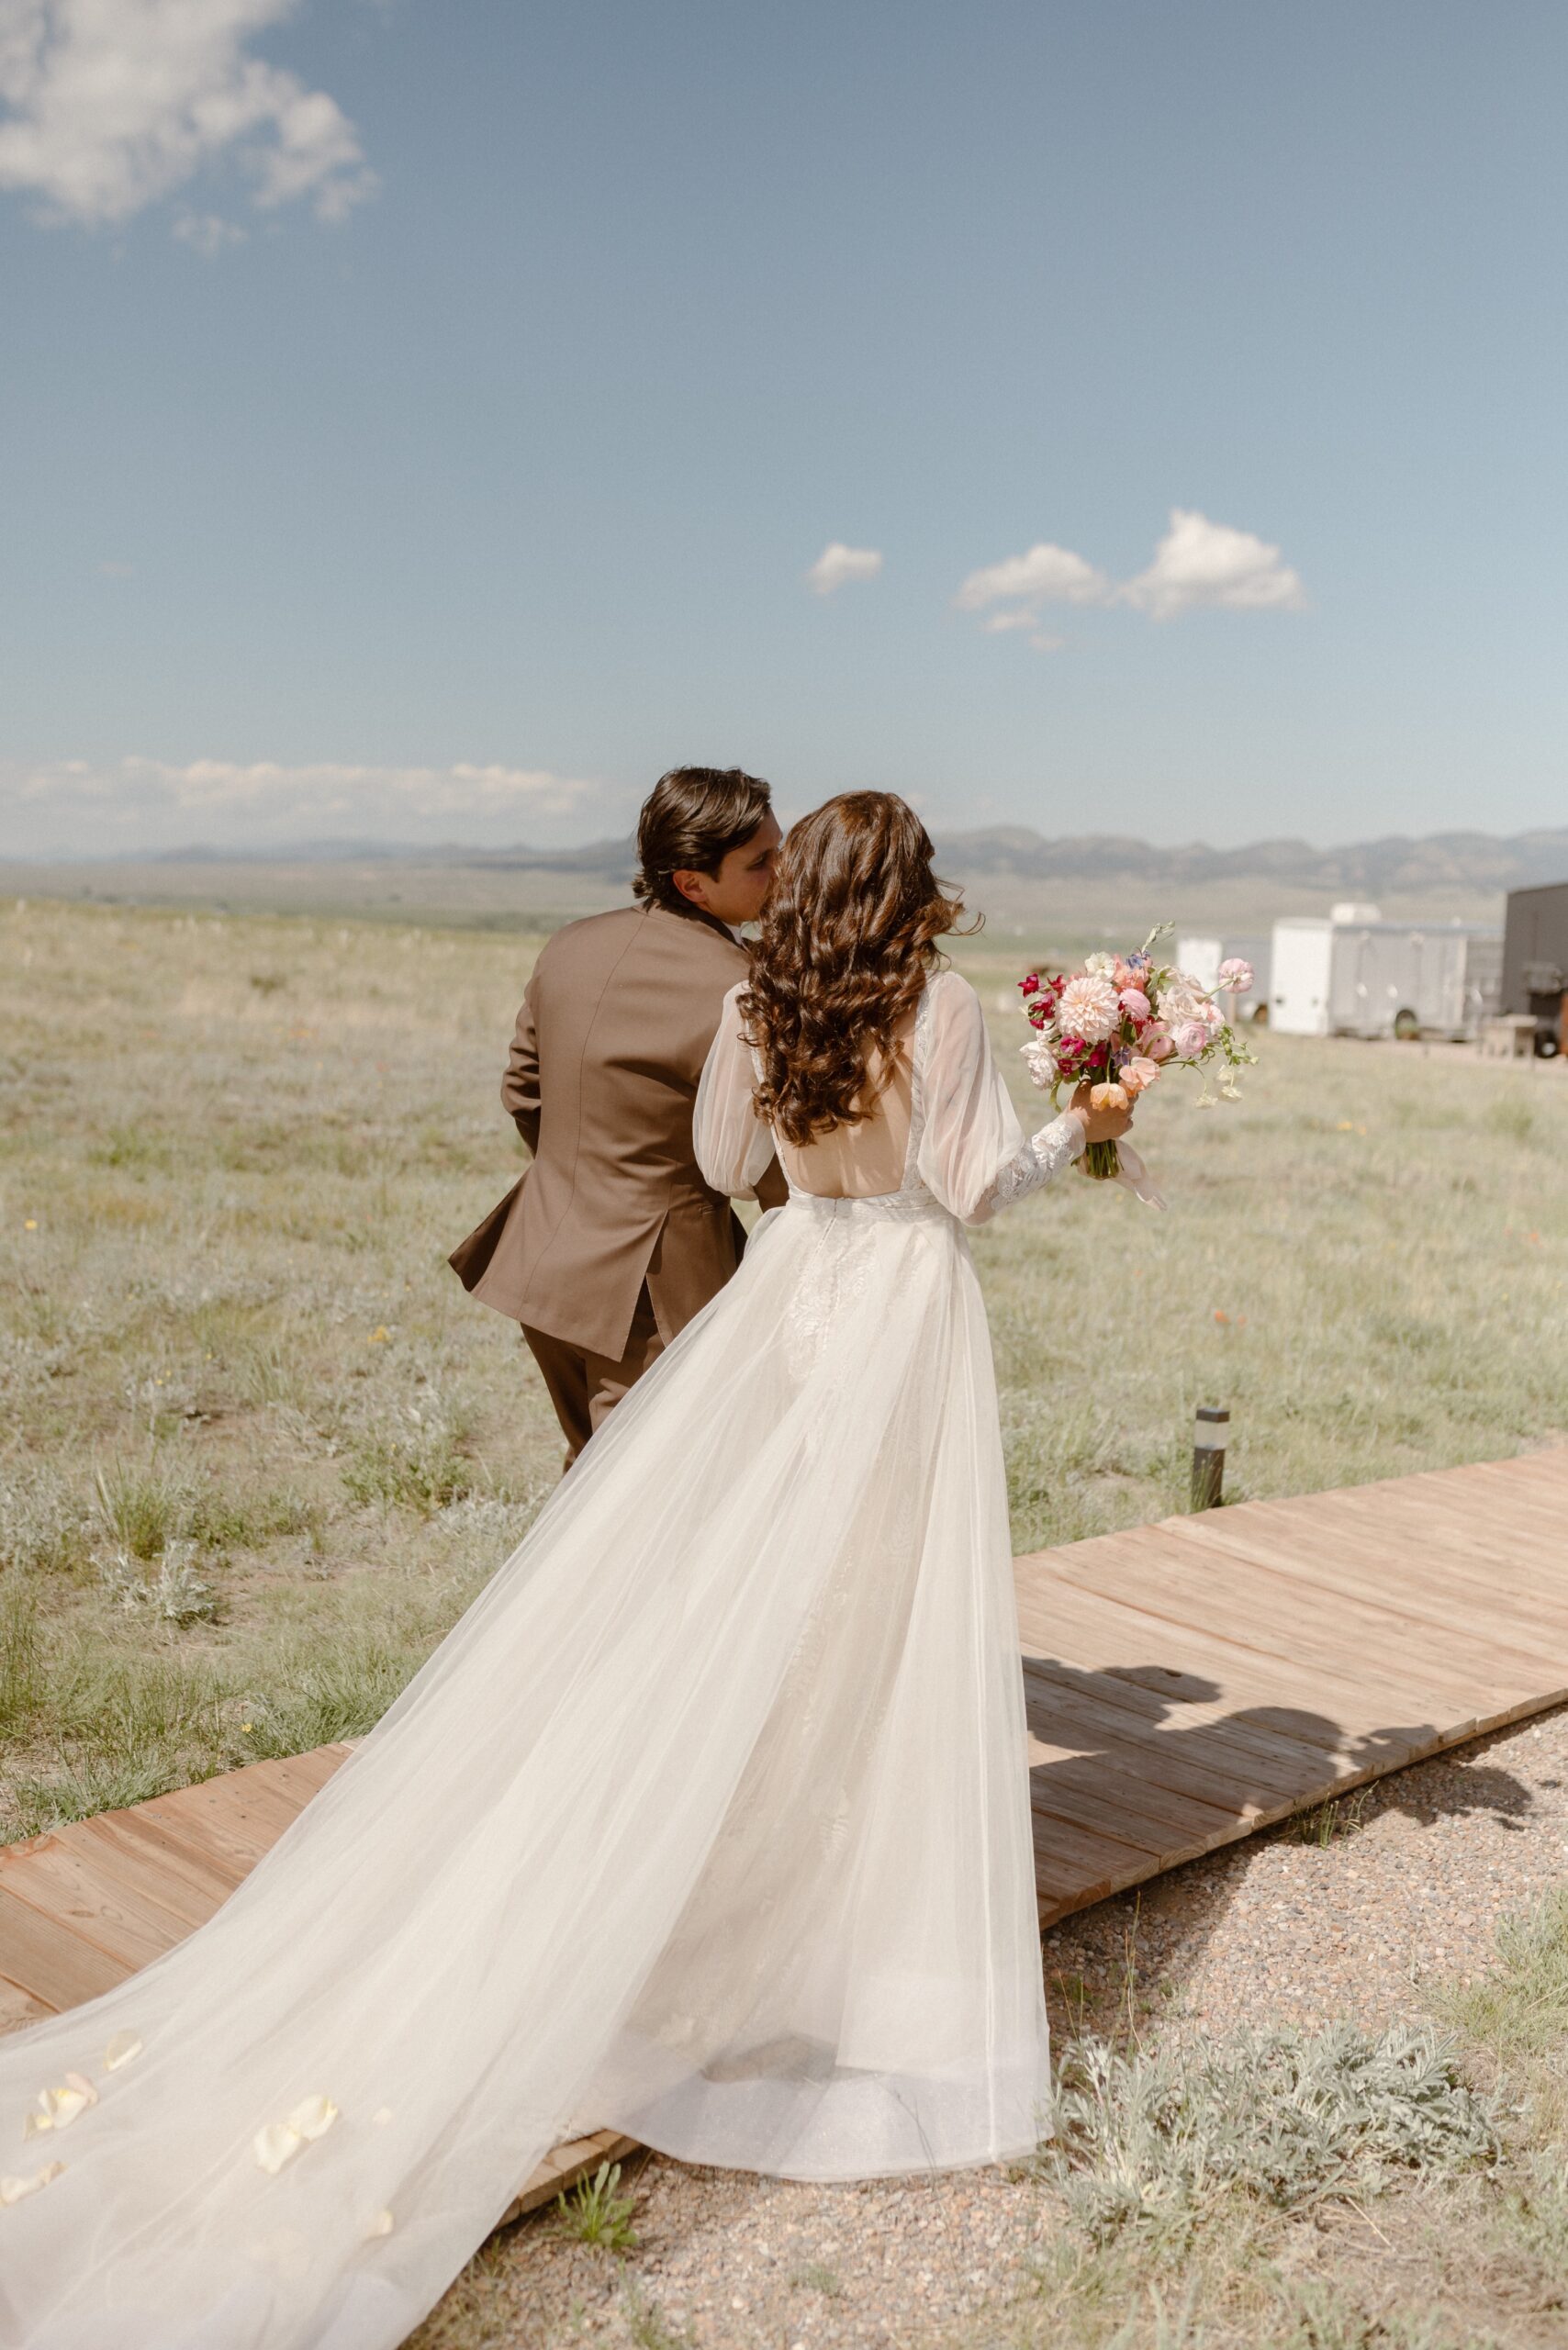 A bride and groom kiss each other on a wooden path in a grassy field at Three Peaks Ranch. Photo by Colorado wedding photographer Ashley Joyce.